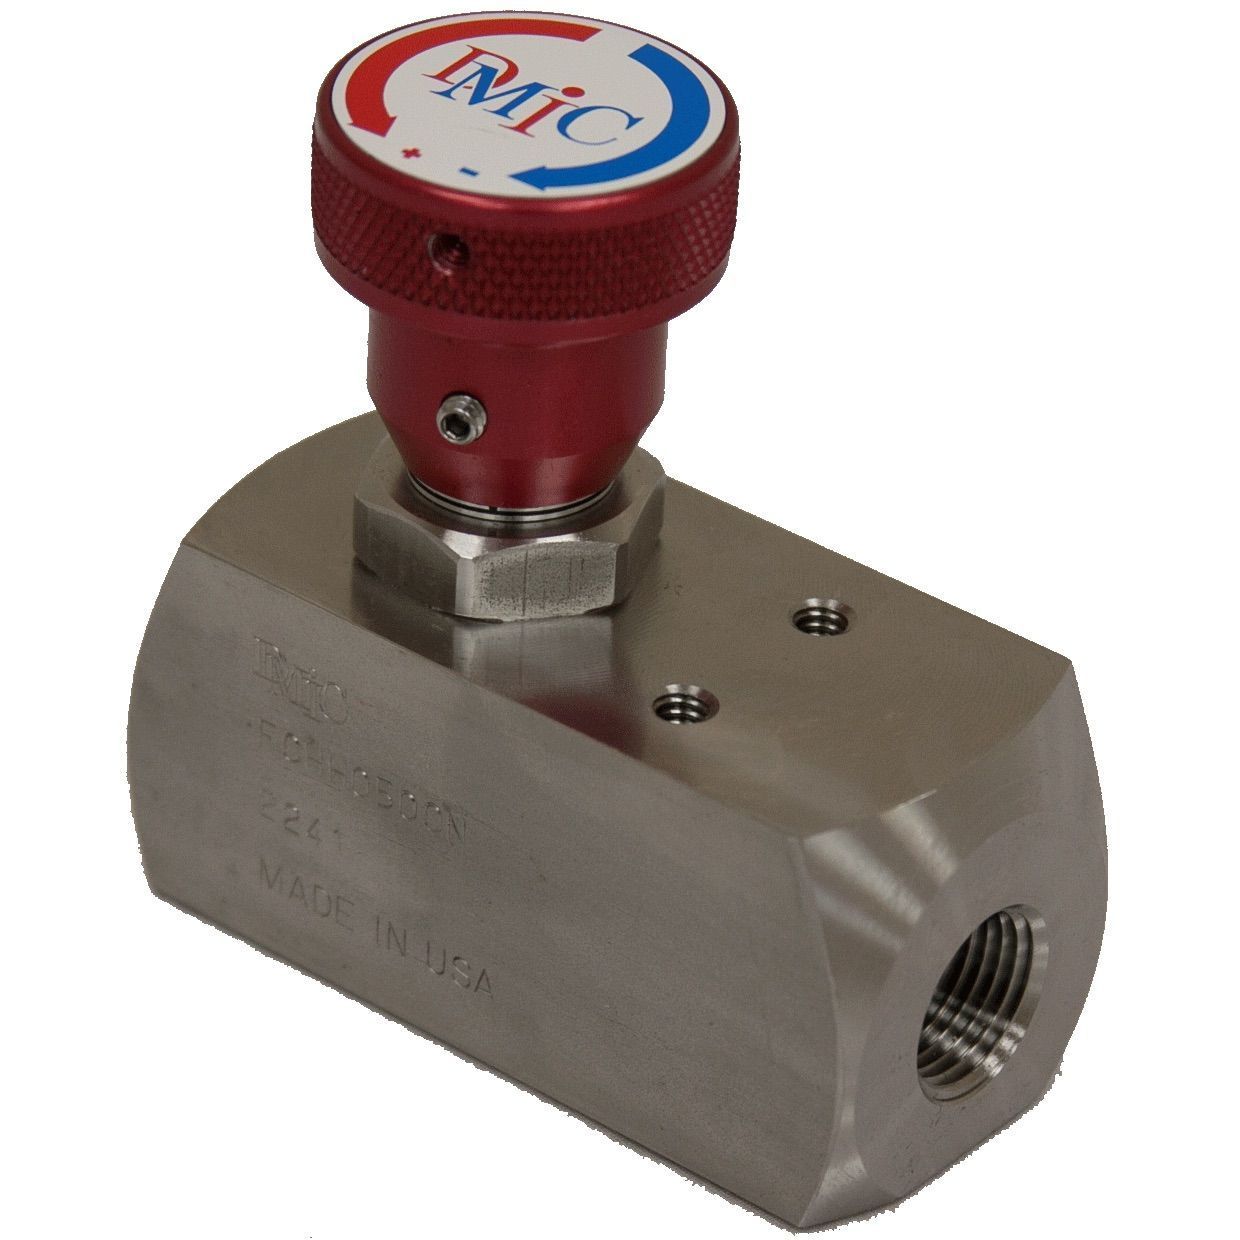 FCHH-2000N-2221 : DMIC Flow Control, Unidirectional, with Integrated Check, 2" NPT, 316SS, 10000psi